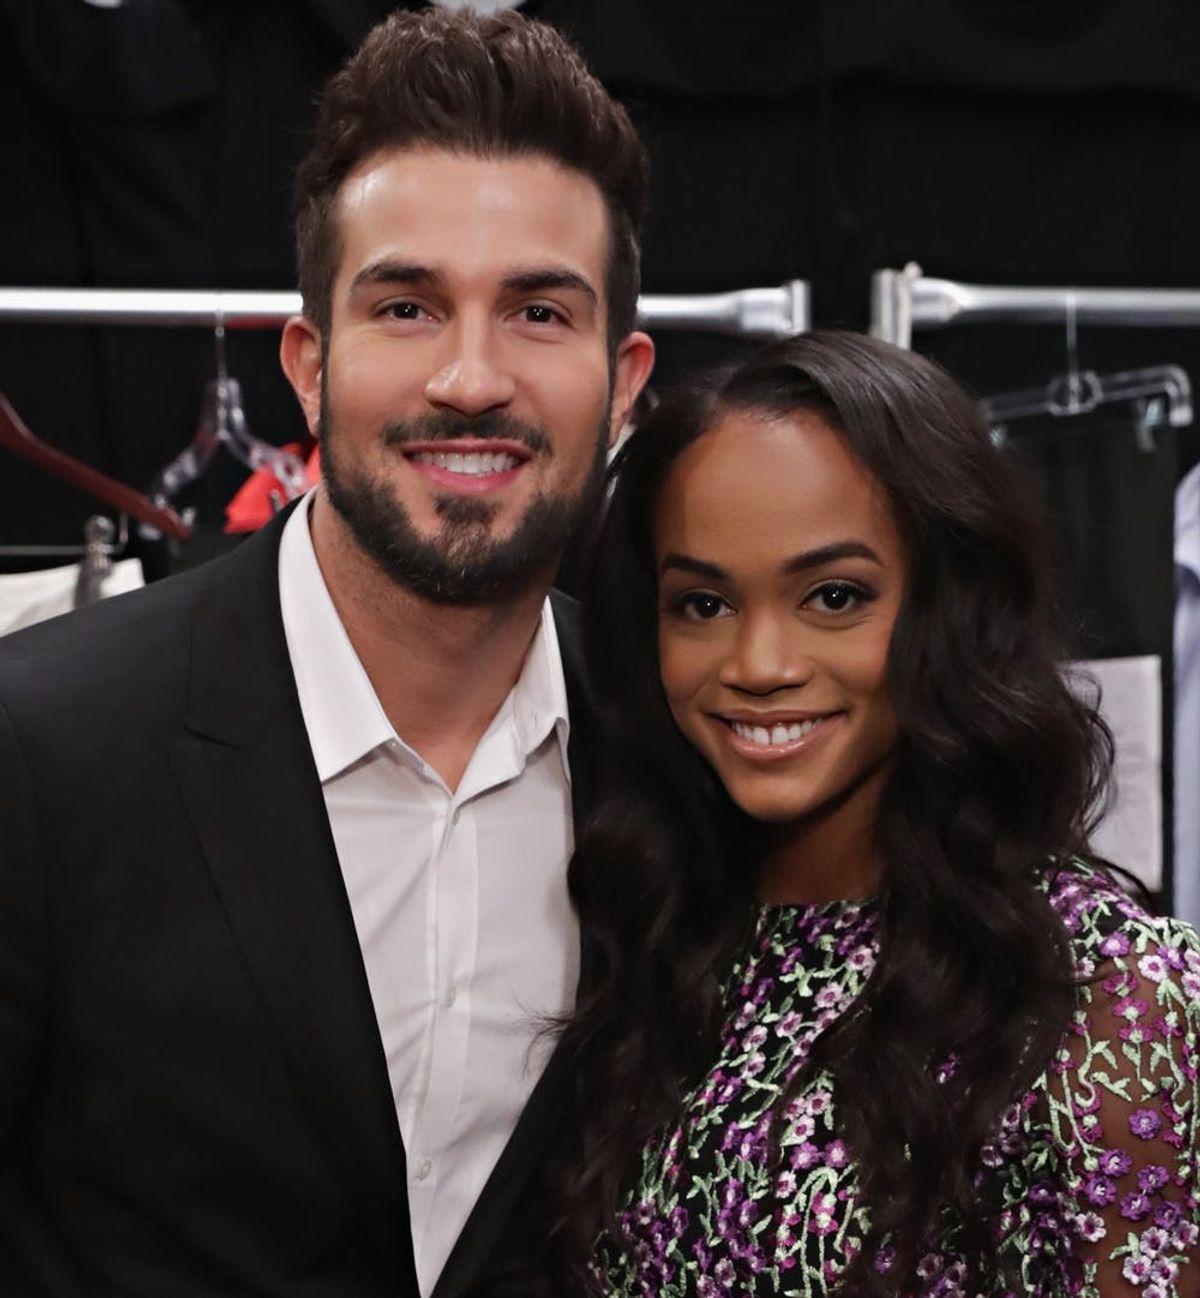 Rachel Lindsay Won’t Be Wearing a Wedding Gown on Her Big Day